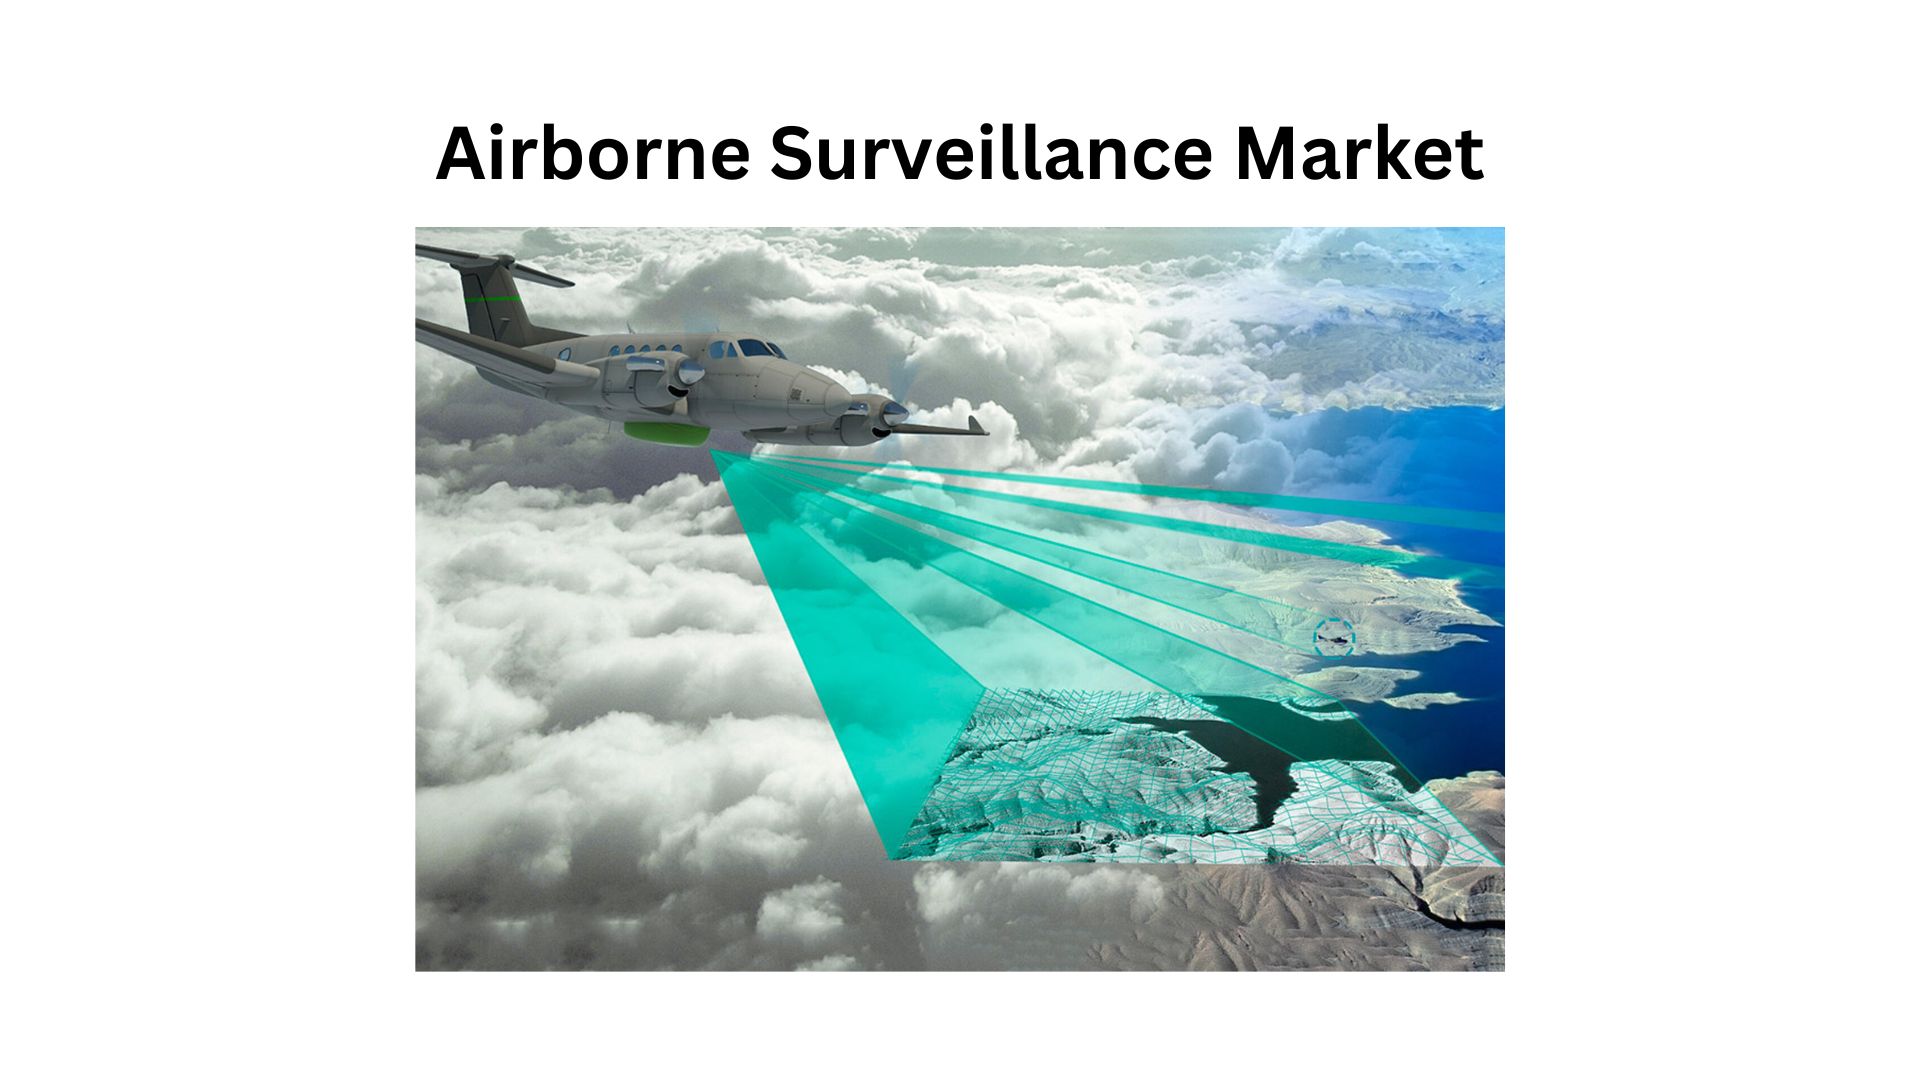 Airborne Surveillance Market Size is expected to reach USD 9.69 Bn by 2033 | CAGR of 6.14%